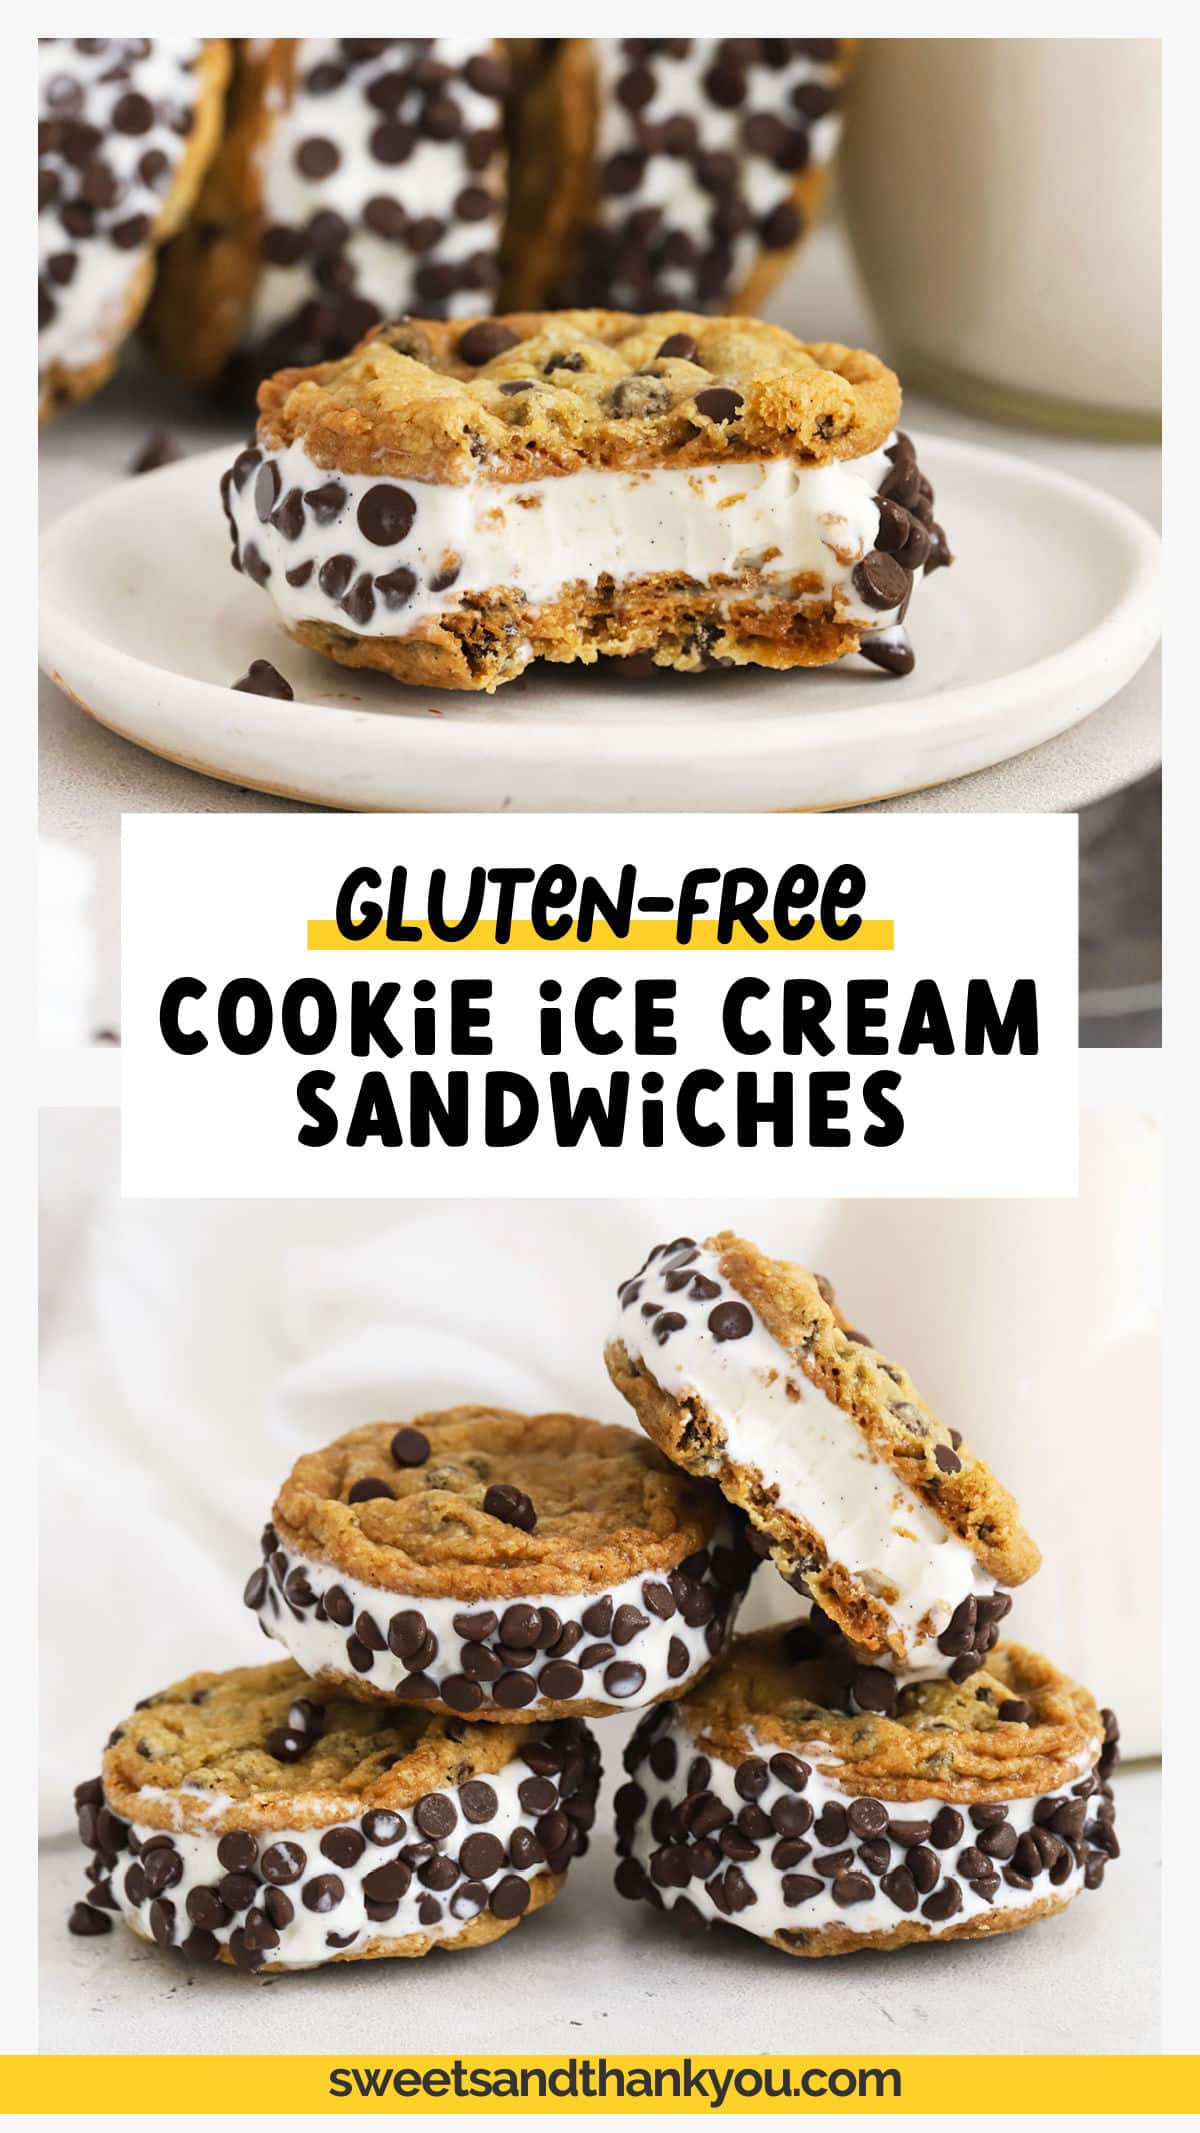 These gluten-free cookie ice cream sandwiches are such a fun summer dessert to cool off with. They're basically a homemade gluten-free chipwich! Made with thin, crisp chocolate chip cookies and creamy vanilla ice cream. Try our classic combination or mix & match ice creams and toppings to create your own! No matter how you make them, this ice cream treat is always a hit with the whole family! 